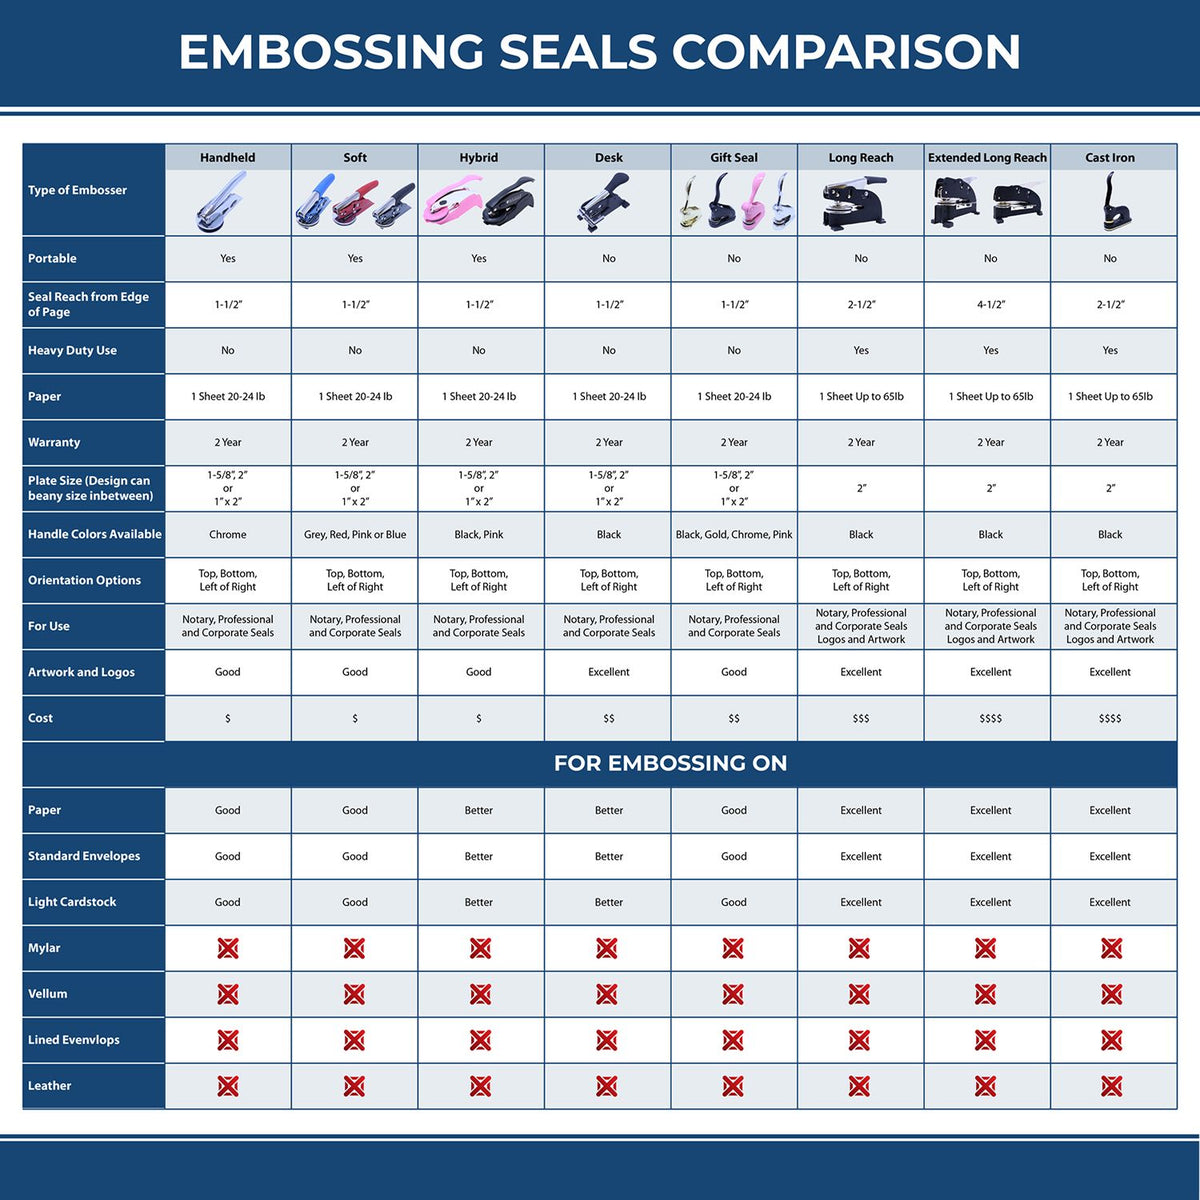 A comparison chart for the different types of mount models available for the State of Iowa Soft Land Surveyor Embossing Seal.